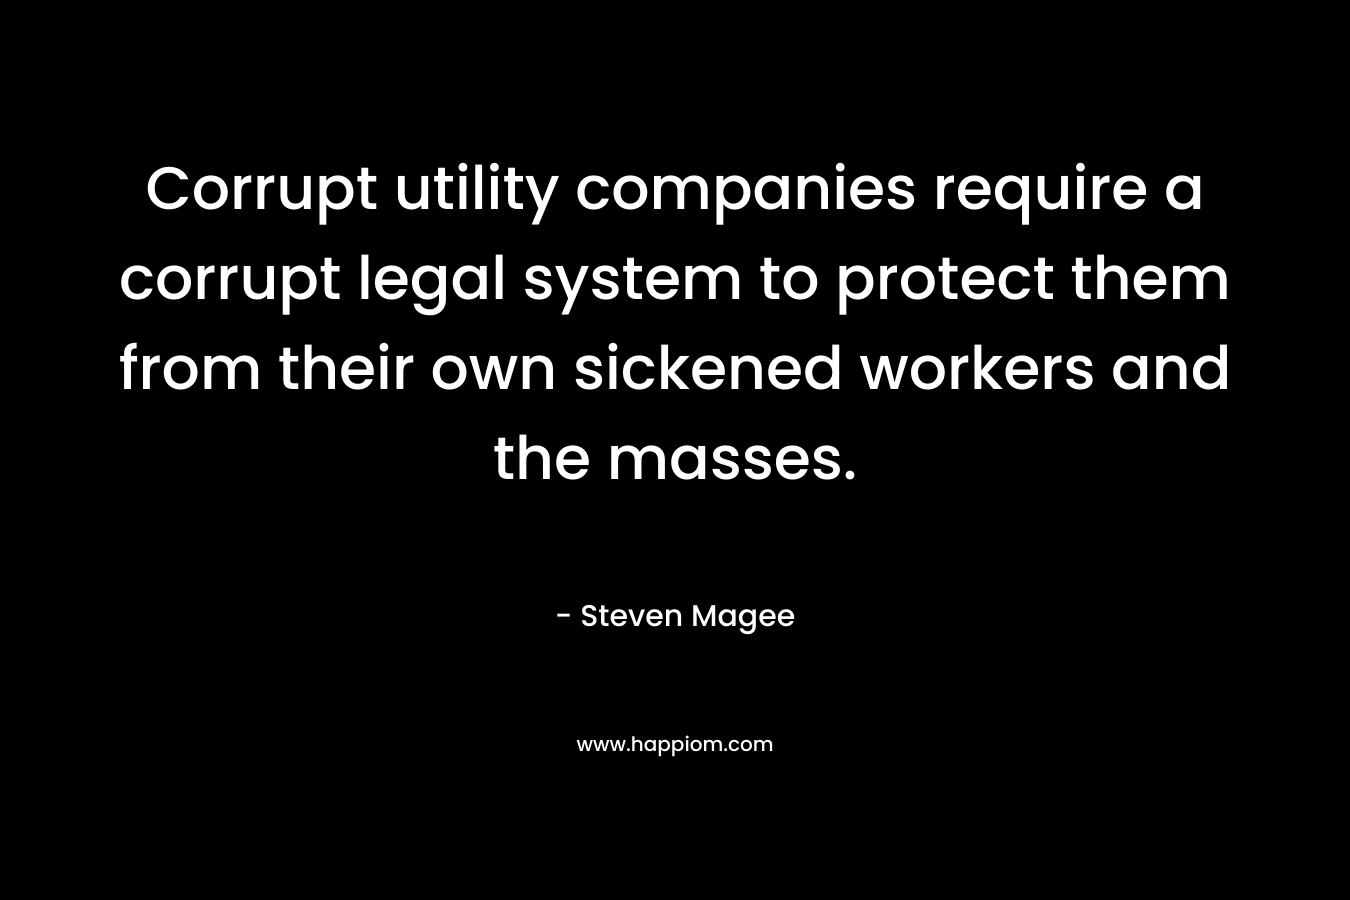 Corrupt utility companies require a corrupt legal system to protect them from their own sickened workers and the masses. – Steven Magee